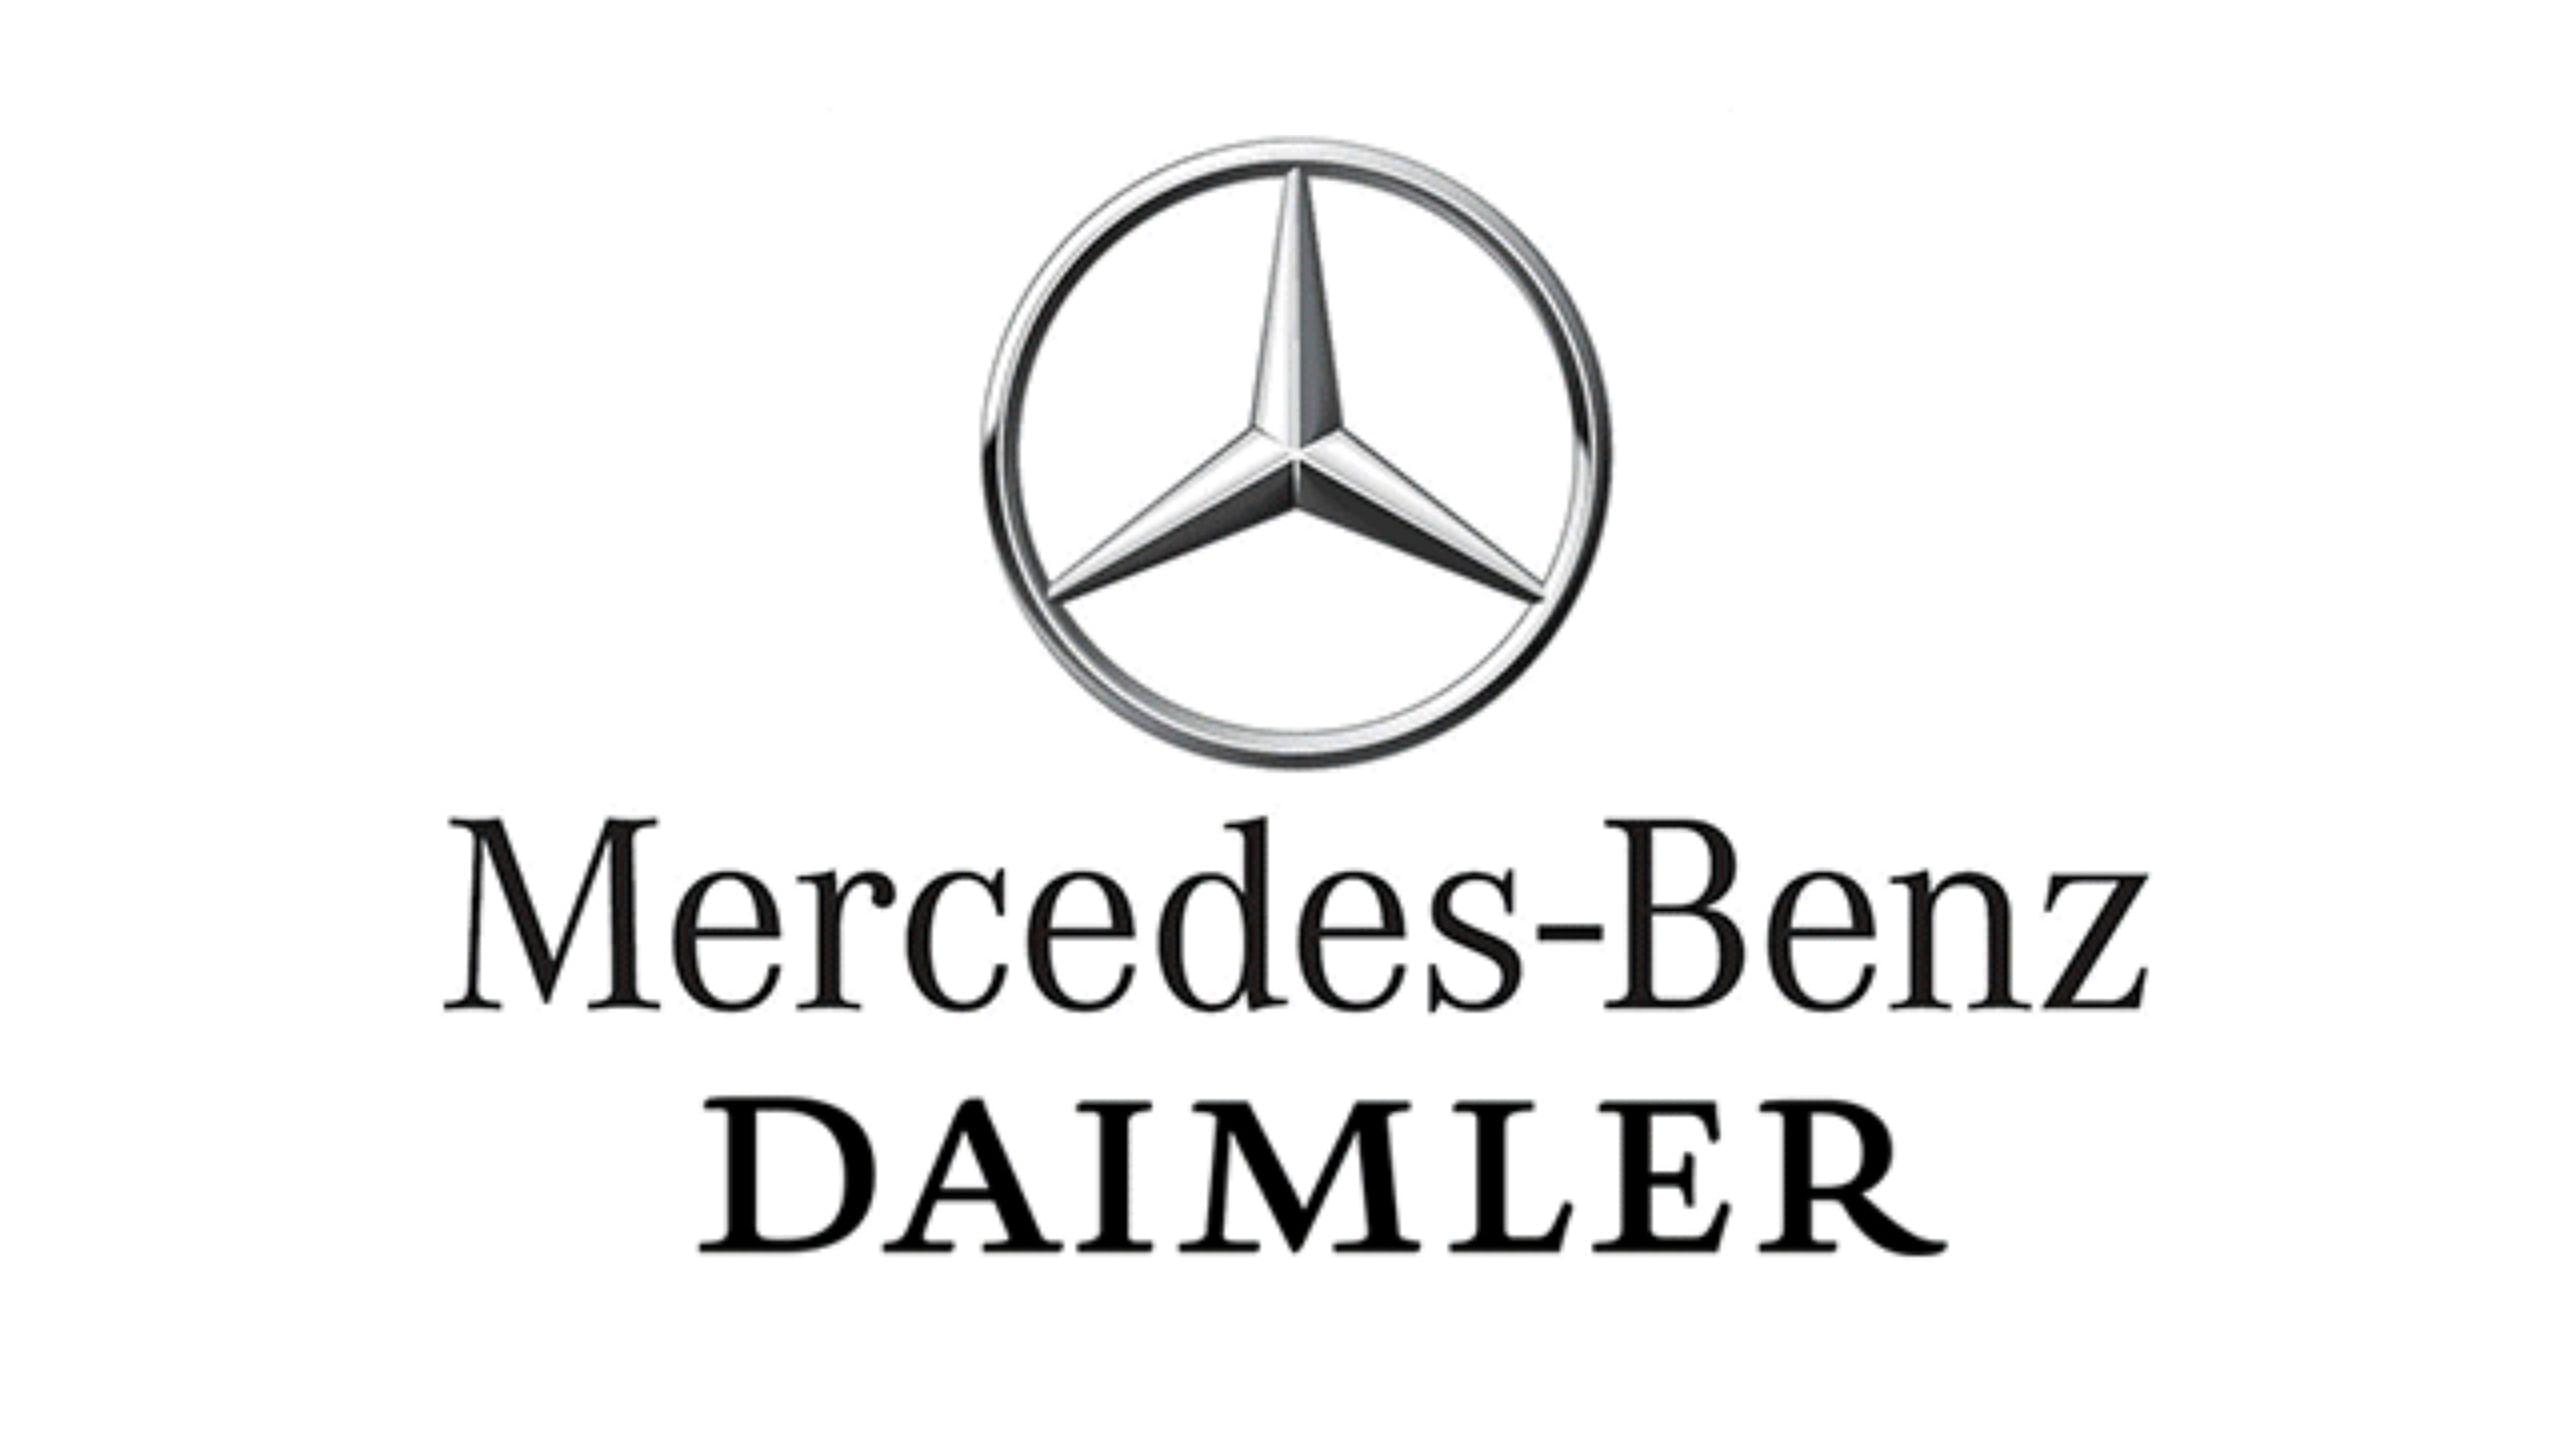 "In Formula 1 we can test hybrid technology and new fuels" - Daimler CEO reiterates desire to continue in F1 with Mercedes